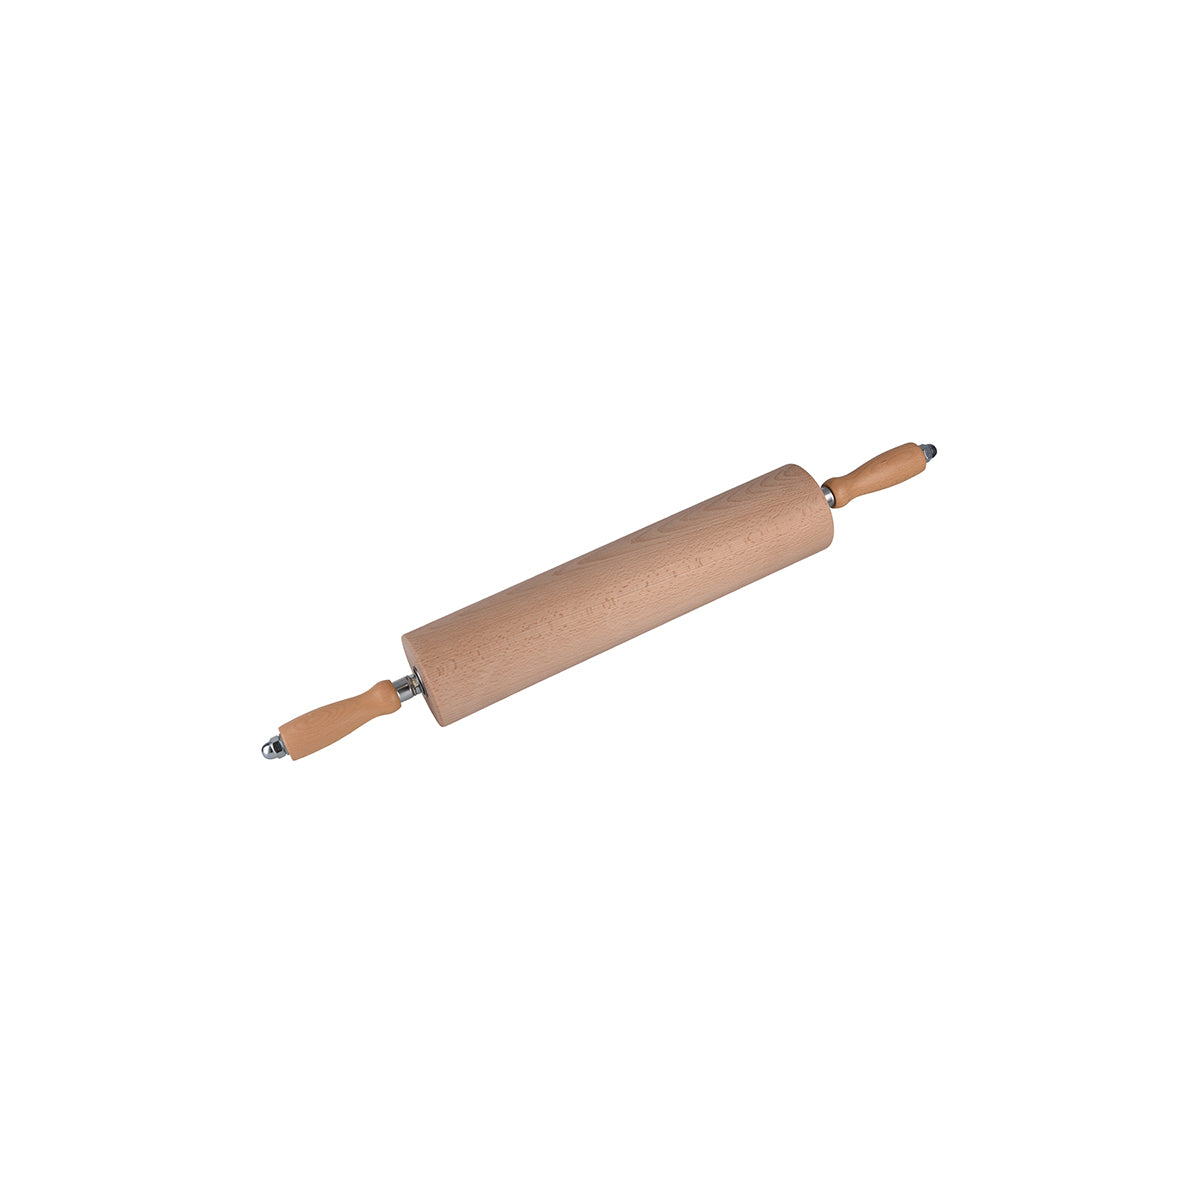 31150 Thermohauser Rolling Pin Wood 350x90mm Tomkin Australia Hospitality Supplies